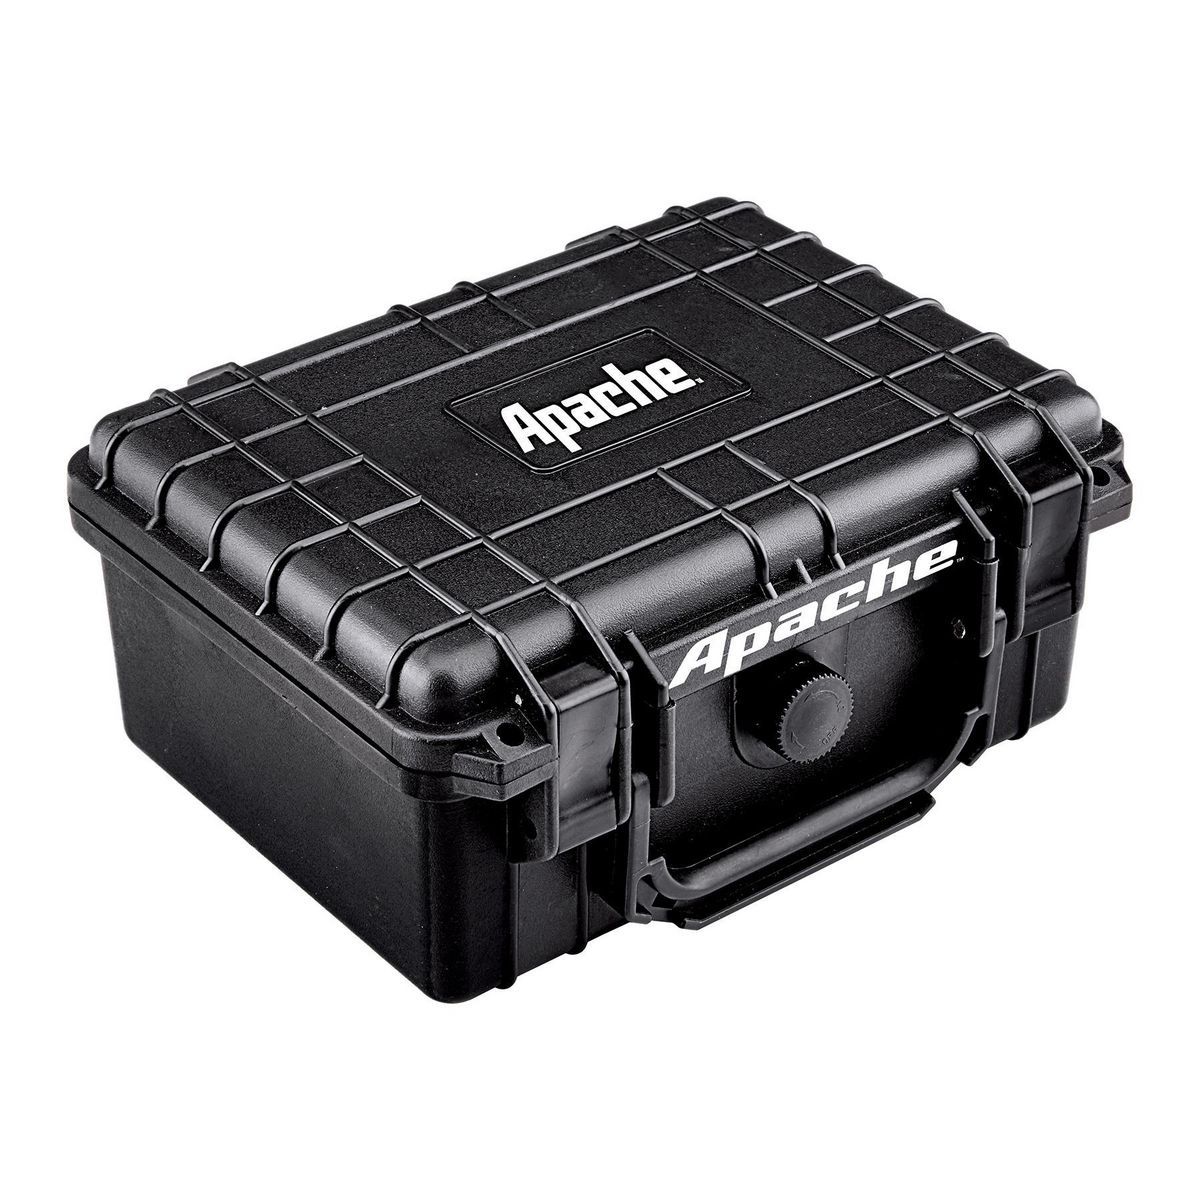 Black Apache 1800 Weatherproof Protective Case, X-Large, Watertight, dust-tight, impact resistant protective case